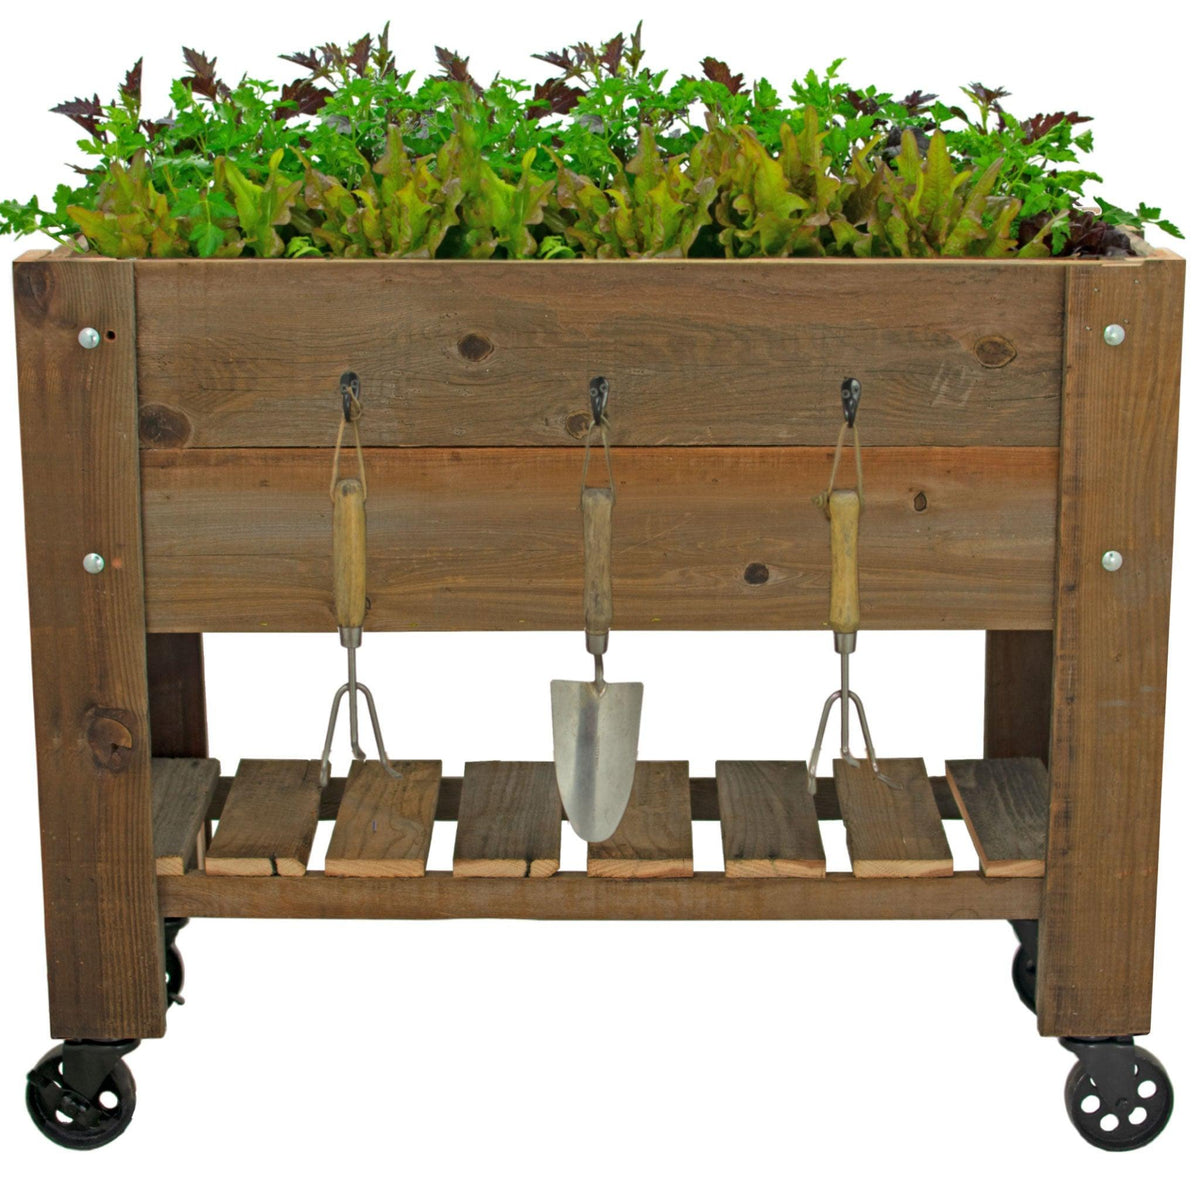 Introducing Lee Display's brand-new Redwood Raised Bed Planter Box with Shelf & Vintage Black Casters Create the perfect little garden inside your home this summer. On sale now at leedisplay.com